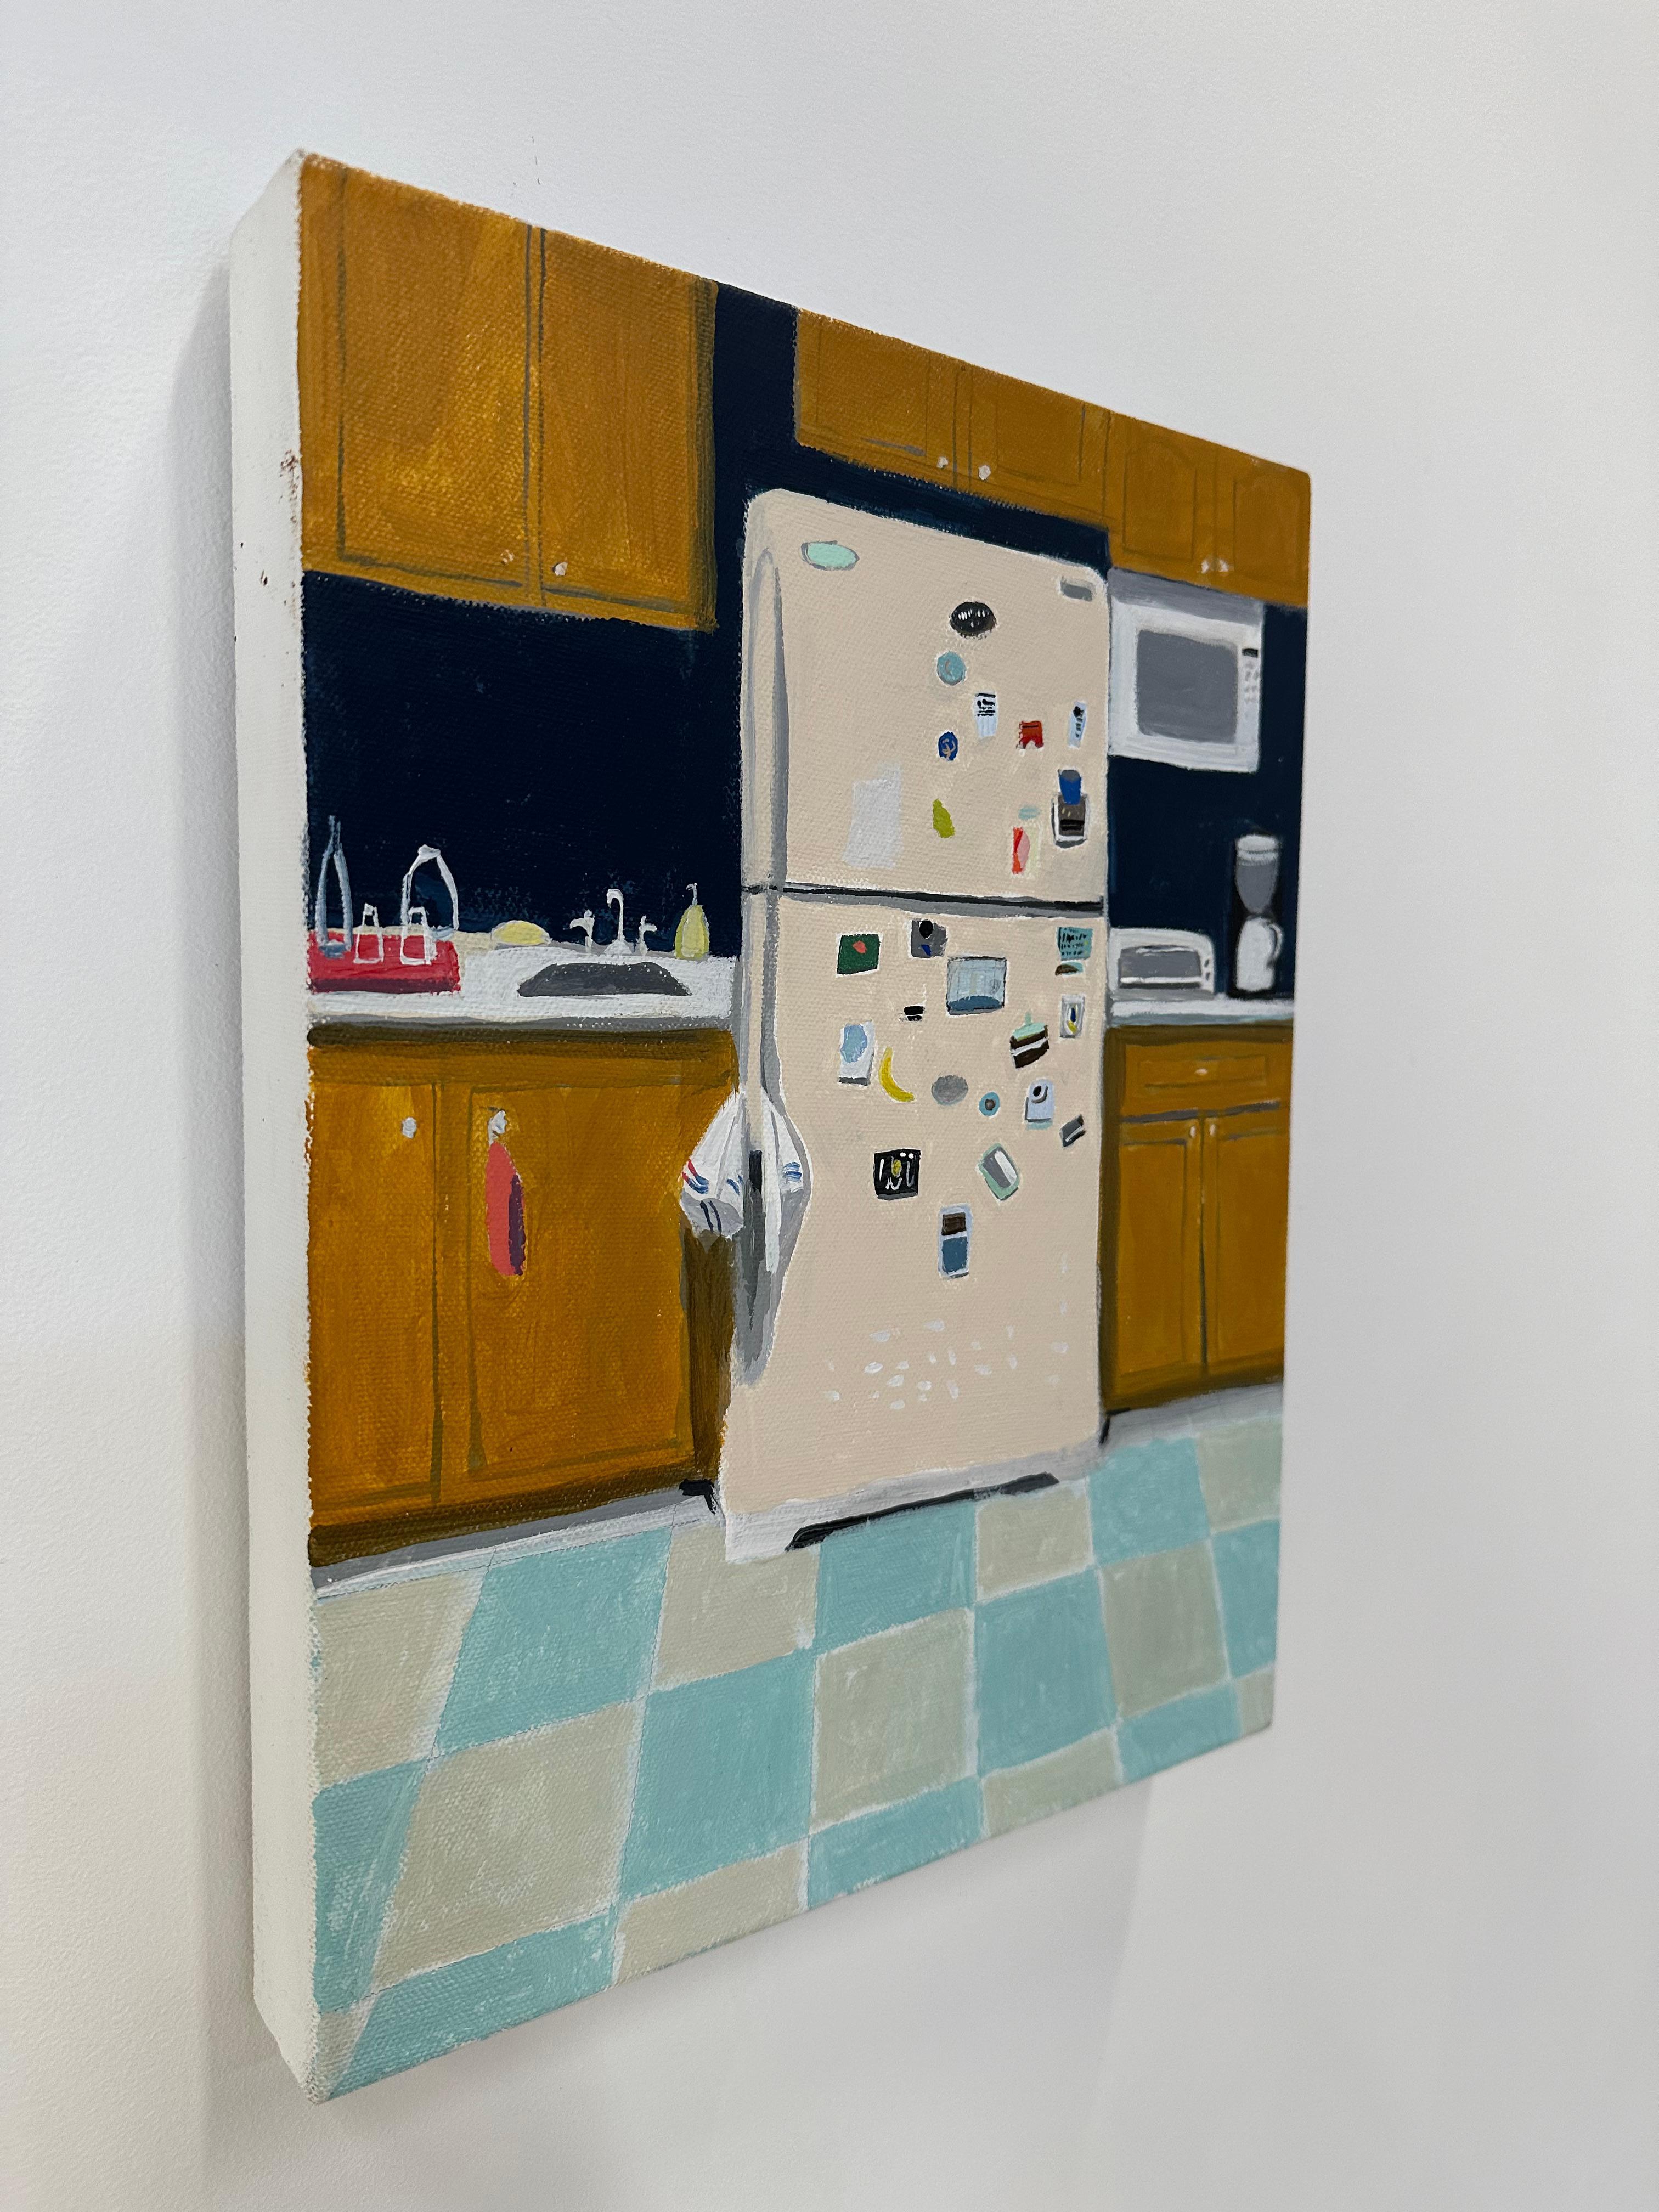 Peach Refrigerator, Kitchen Interior, Yellow Wooden Cabinets, Tiled Floor - Contemporary Painting by Polly Shindler